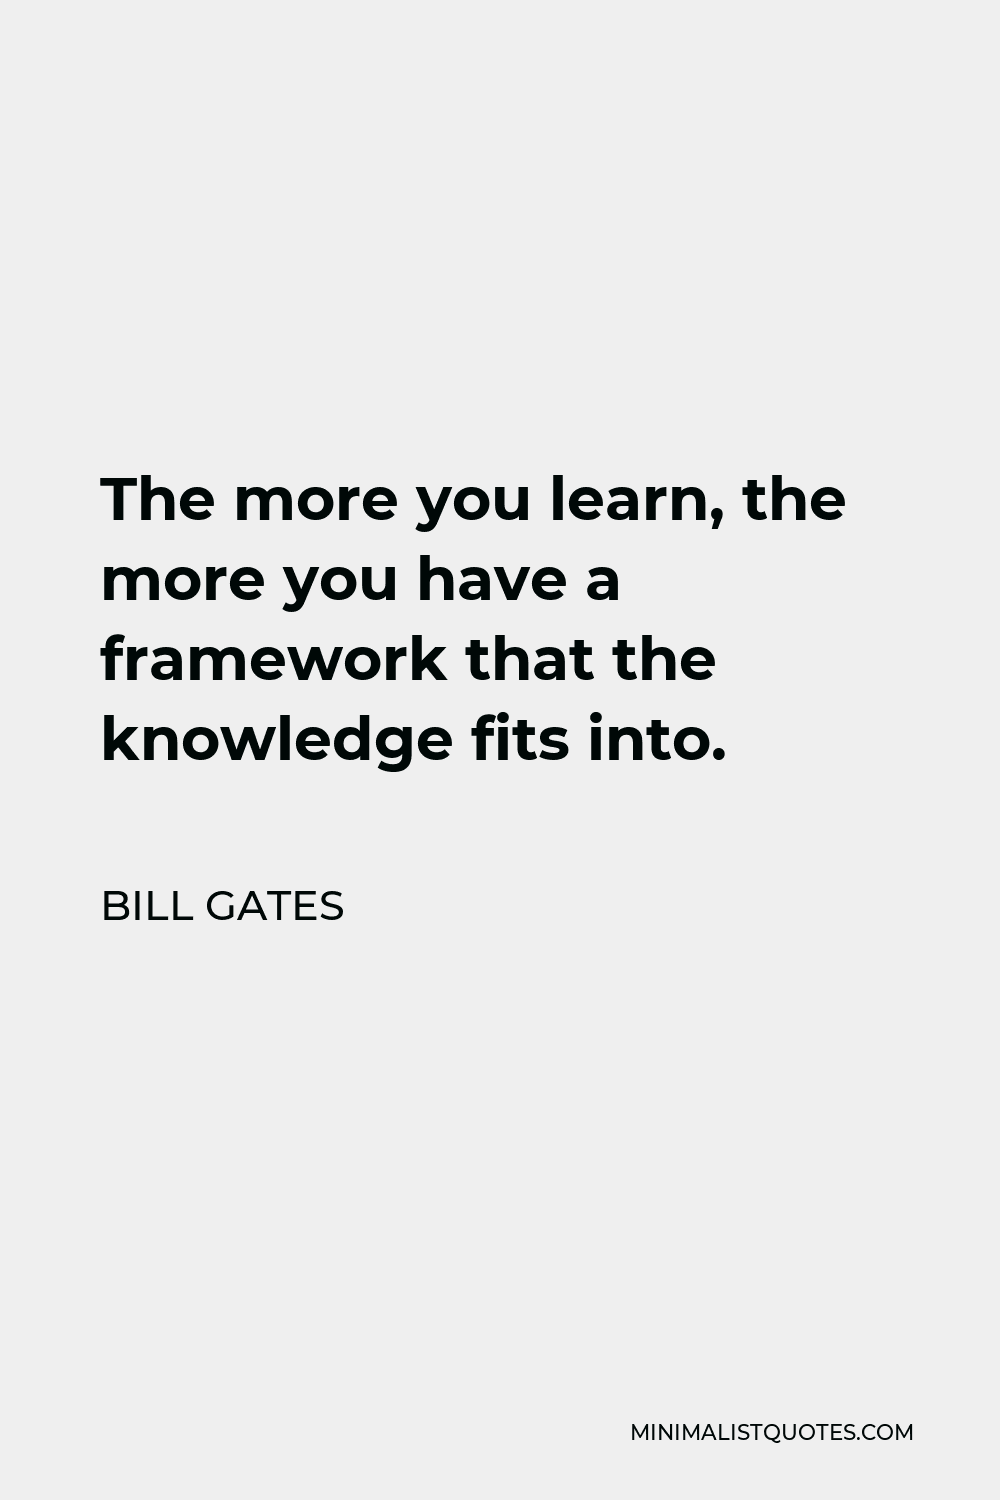 Bill Gates Quote - The more you learn, the more you have a framework that the knowledge fits into.